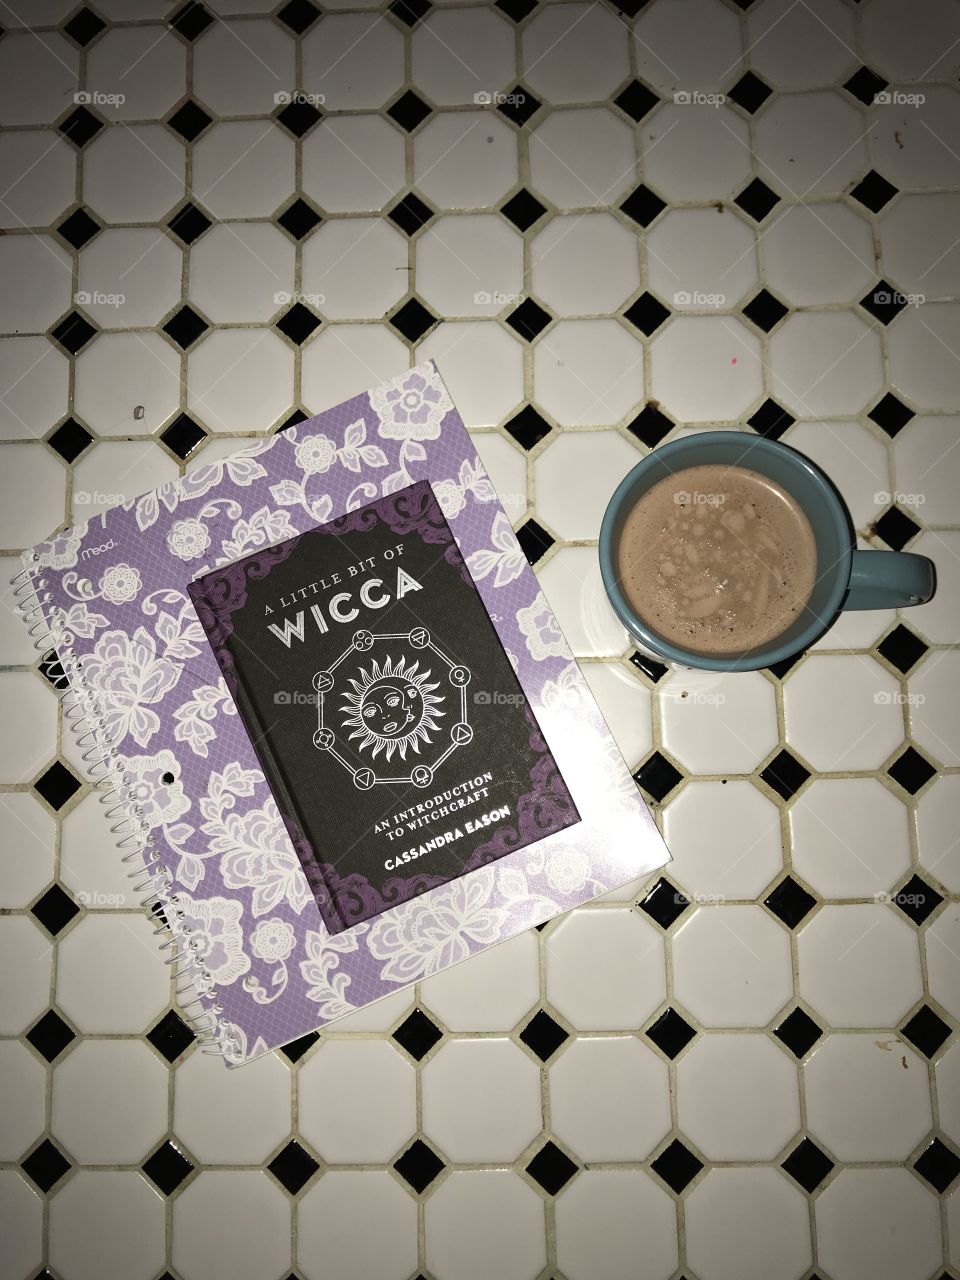 A nice cup of hot chocolate and Wicca. 